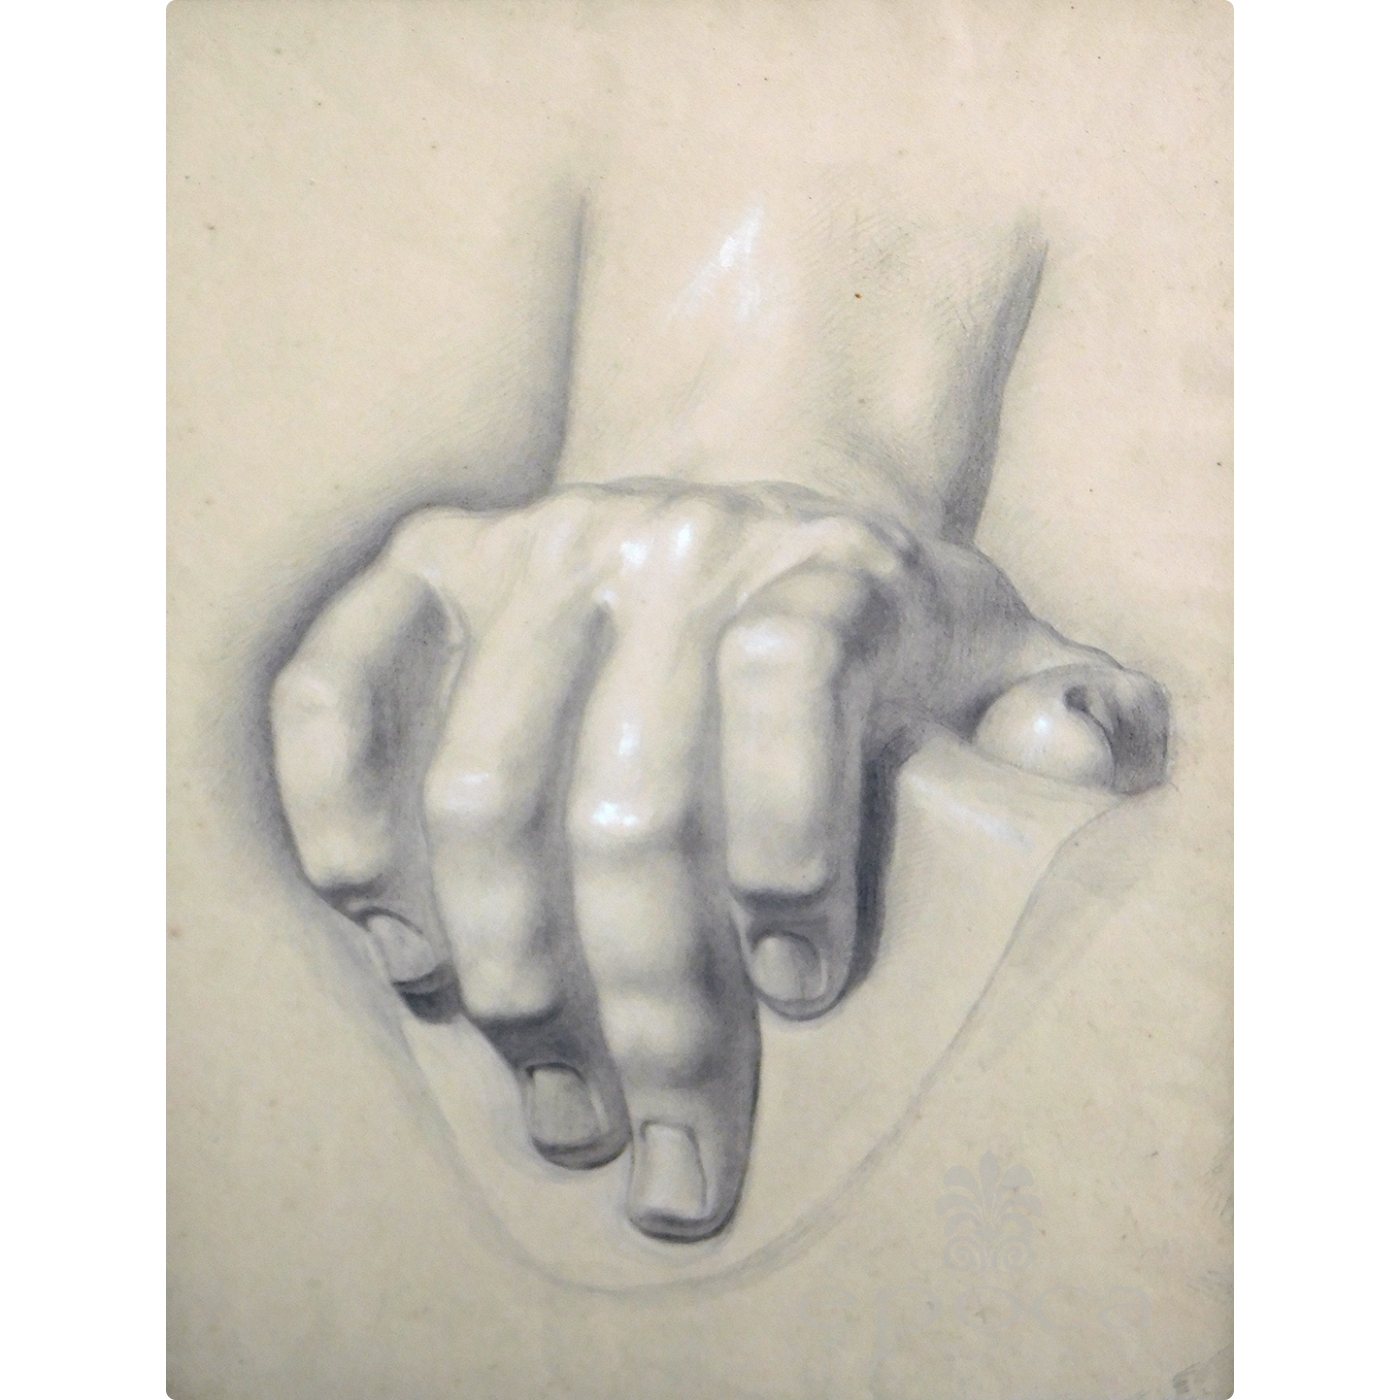 Charcoal & Graphite Archives - Creative Hands